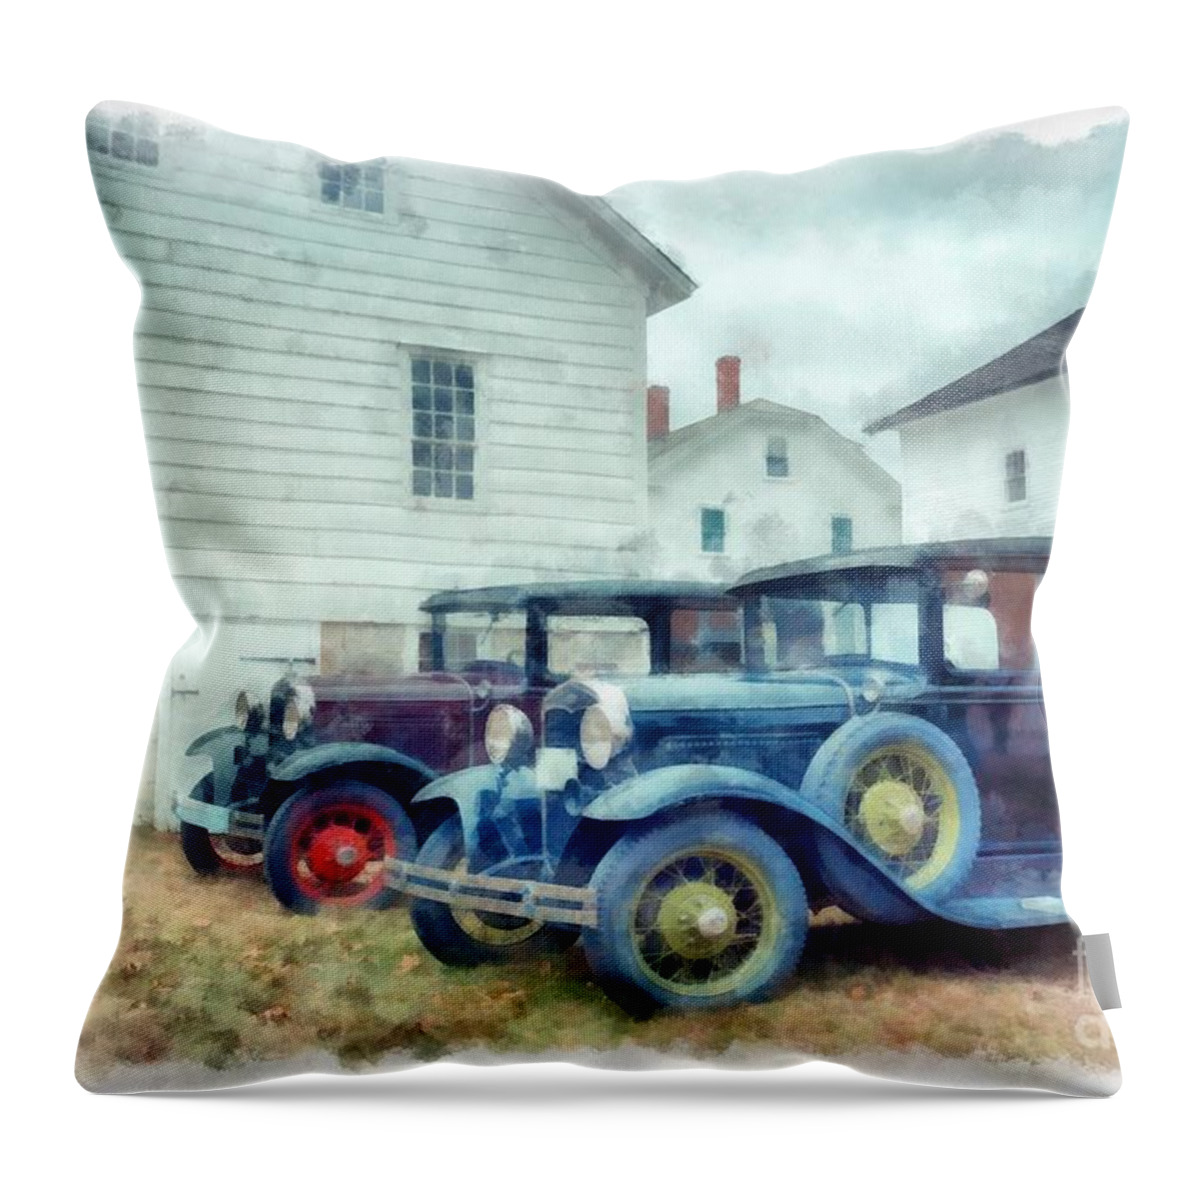 Car Throw Pillow featuring the photograph Classic Ford Model A Cars by Edward Fielding